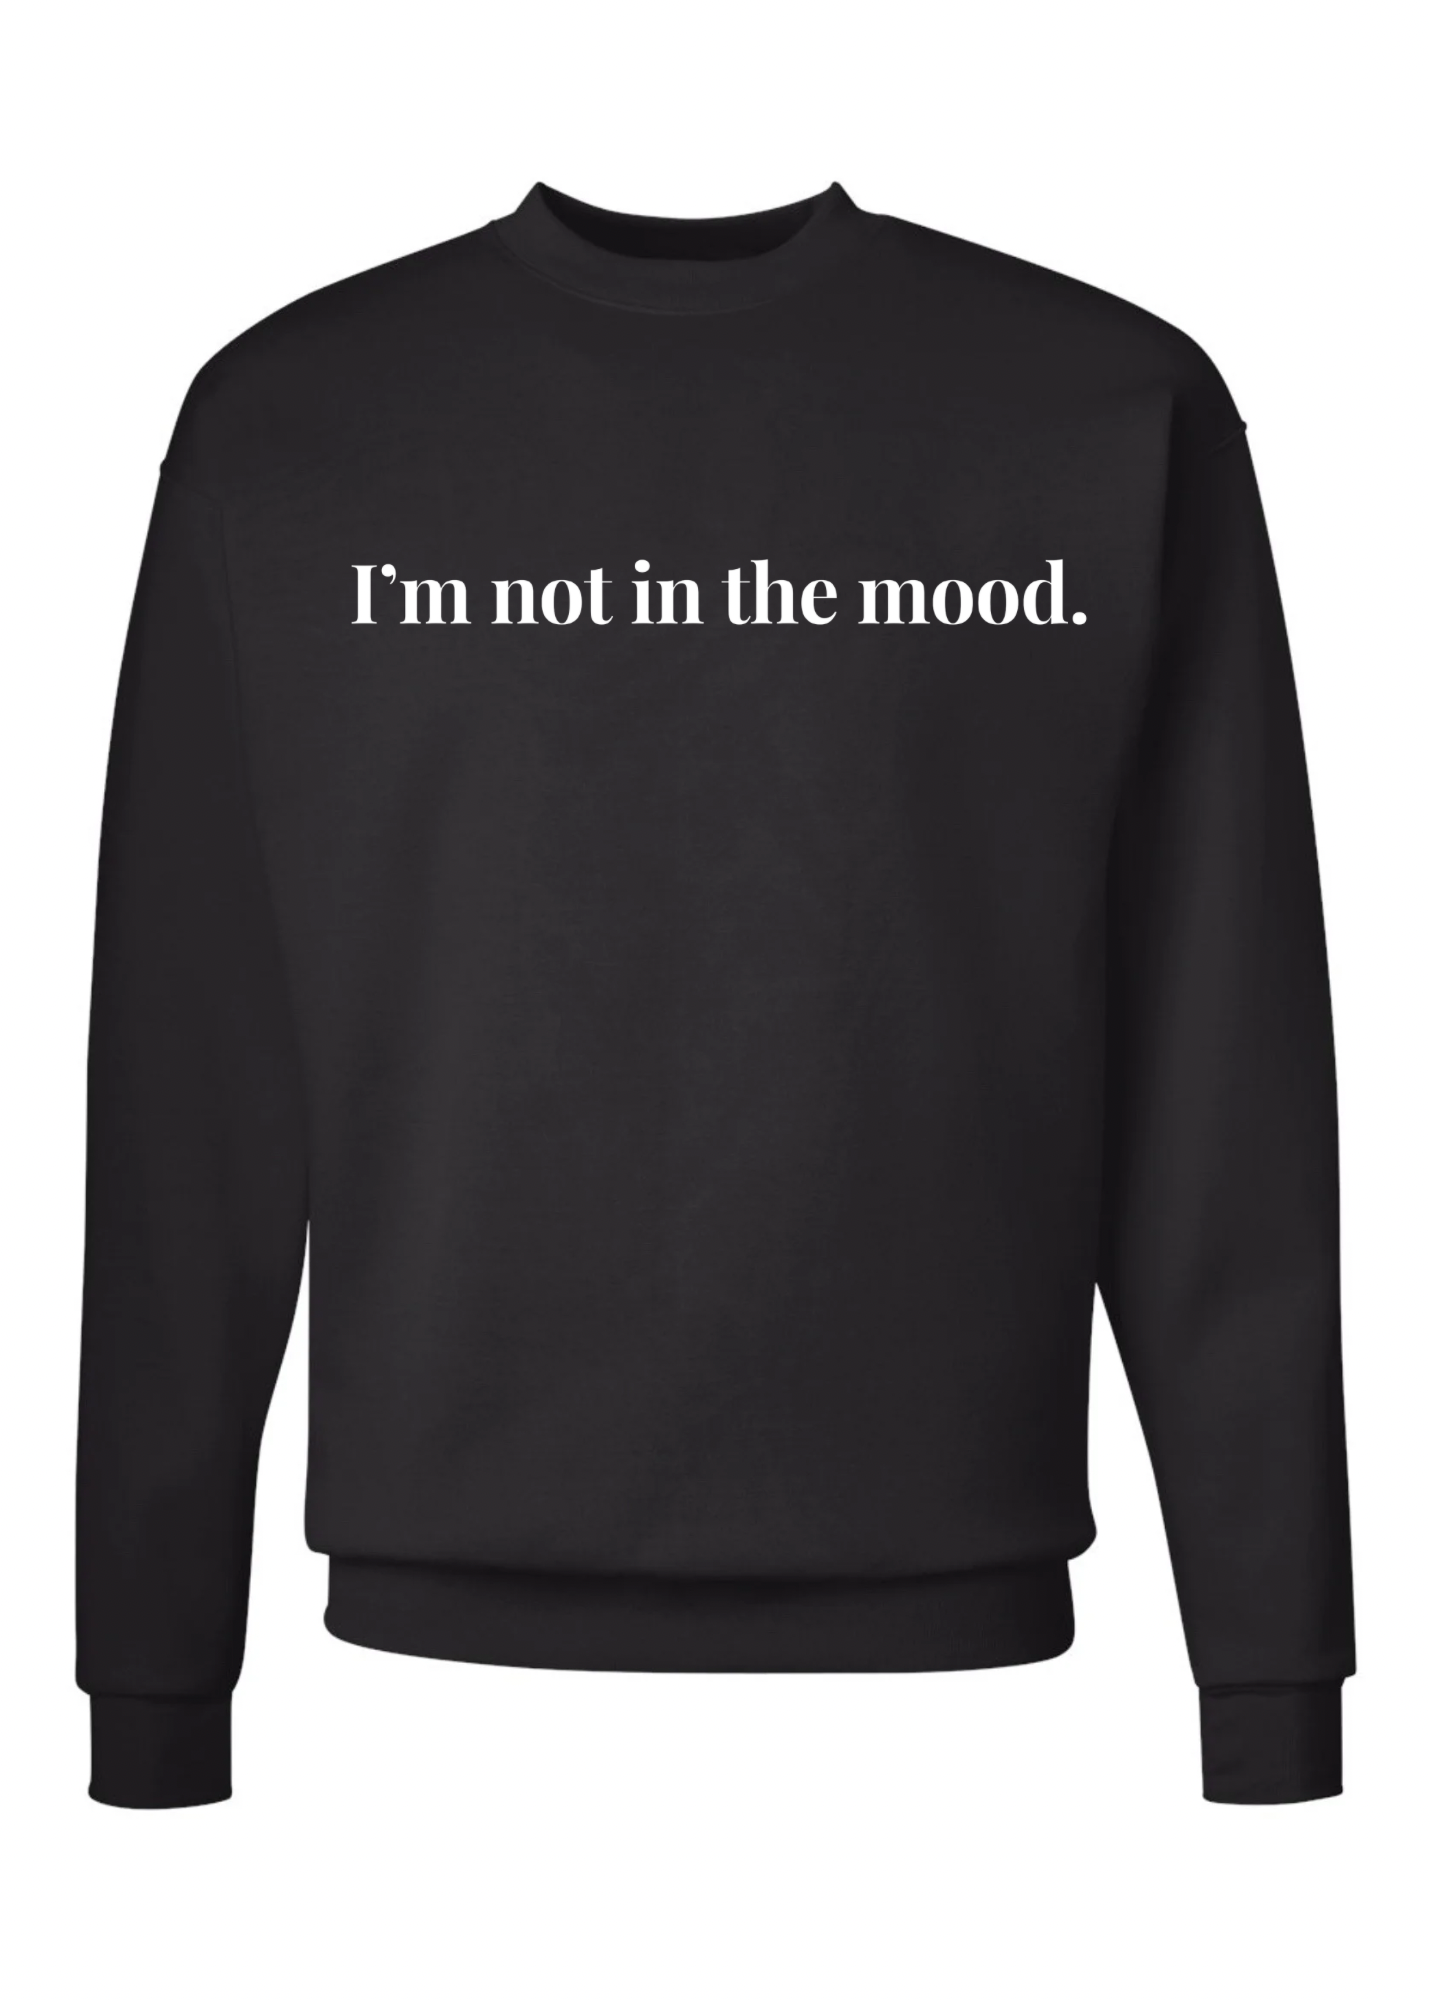 I’m not in the mood Crew Sweatshirts - 3 colors available